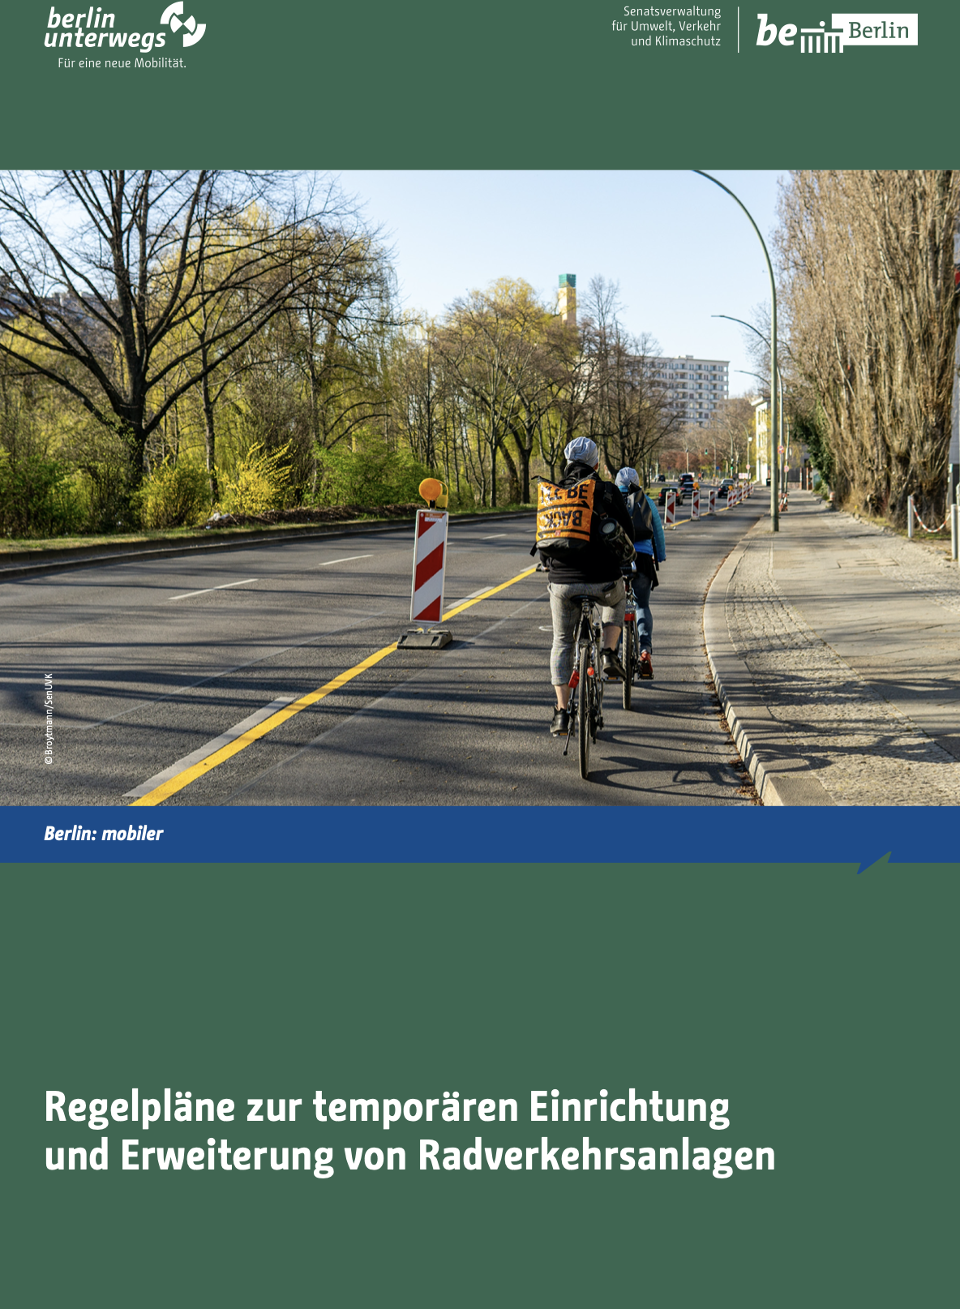 State of Berlin's emergency cycling infrastructure guidance.